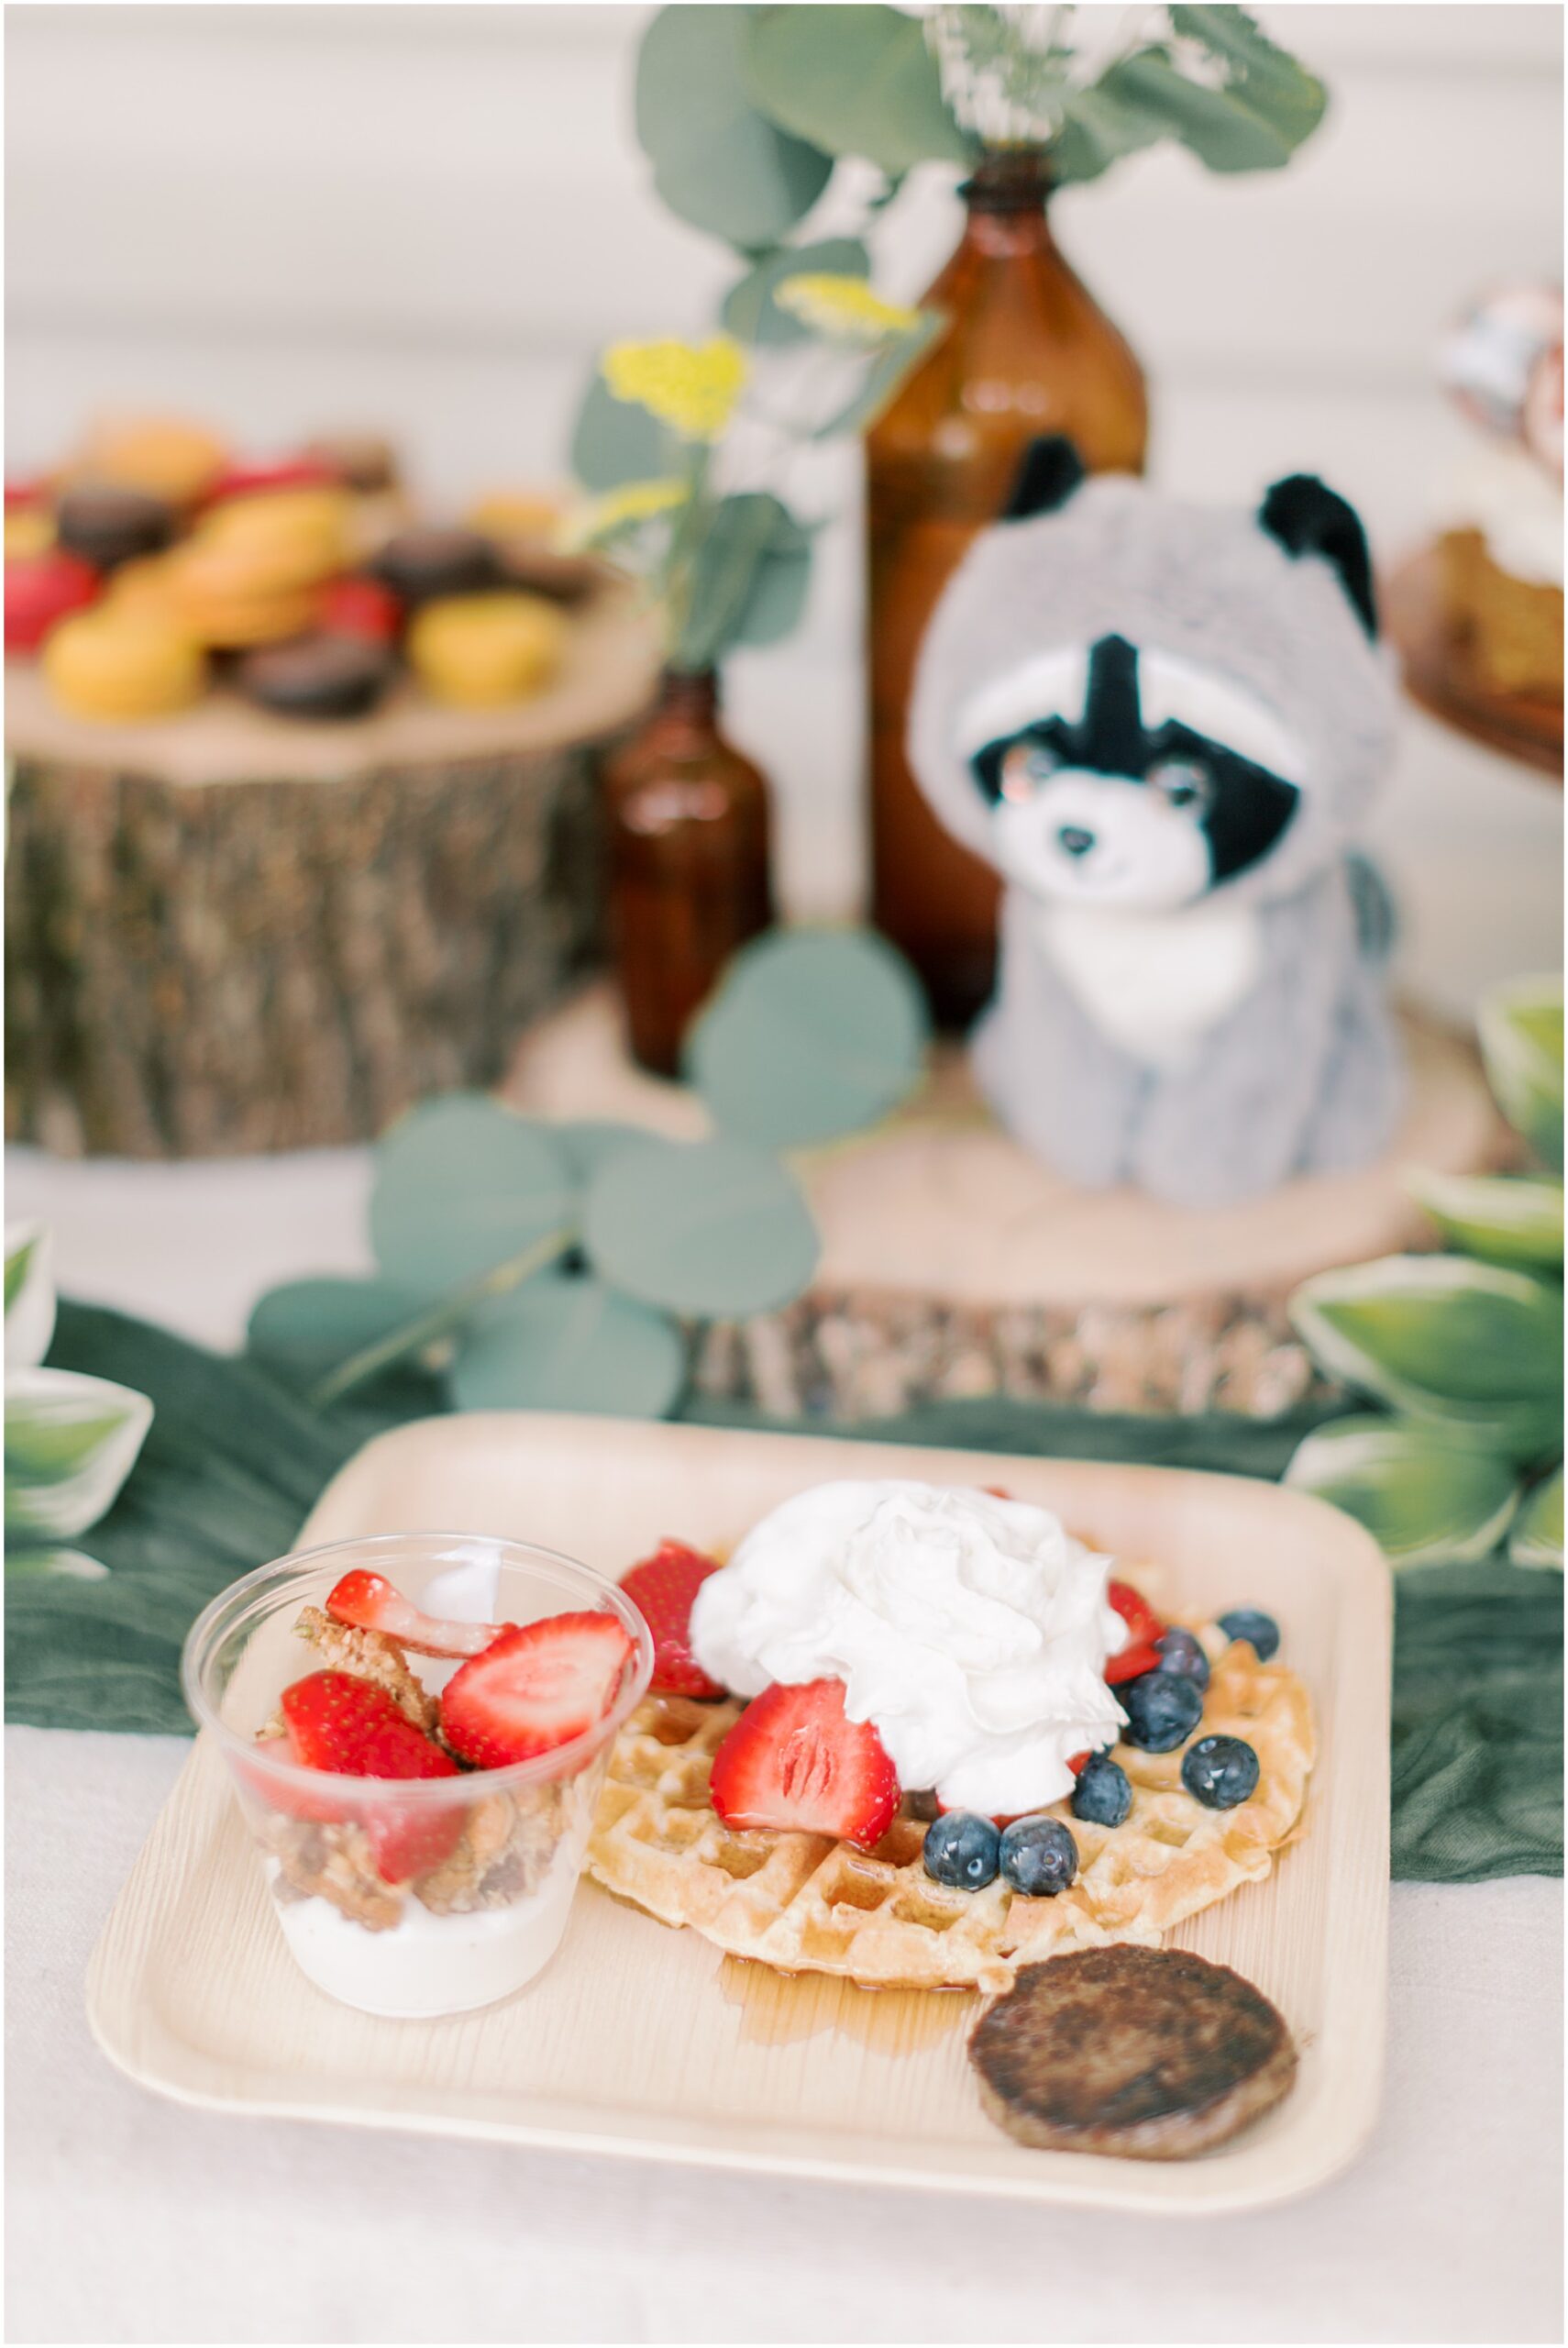 Plate of brunch food at woodland themed baby shower